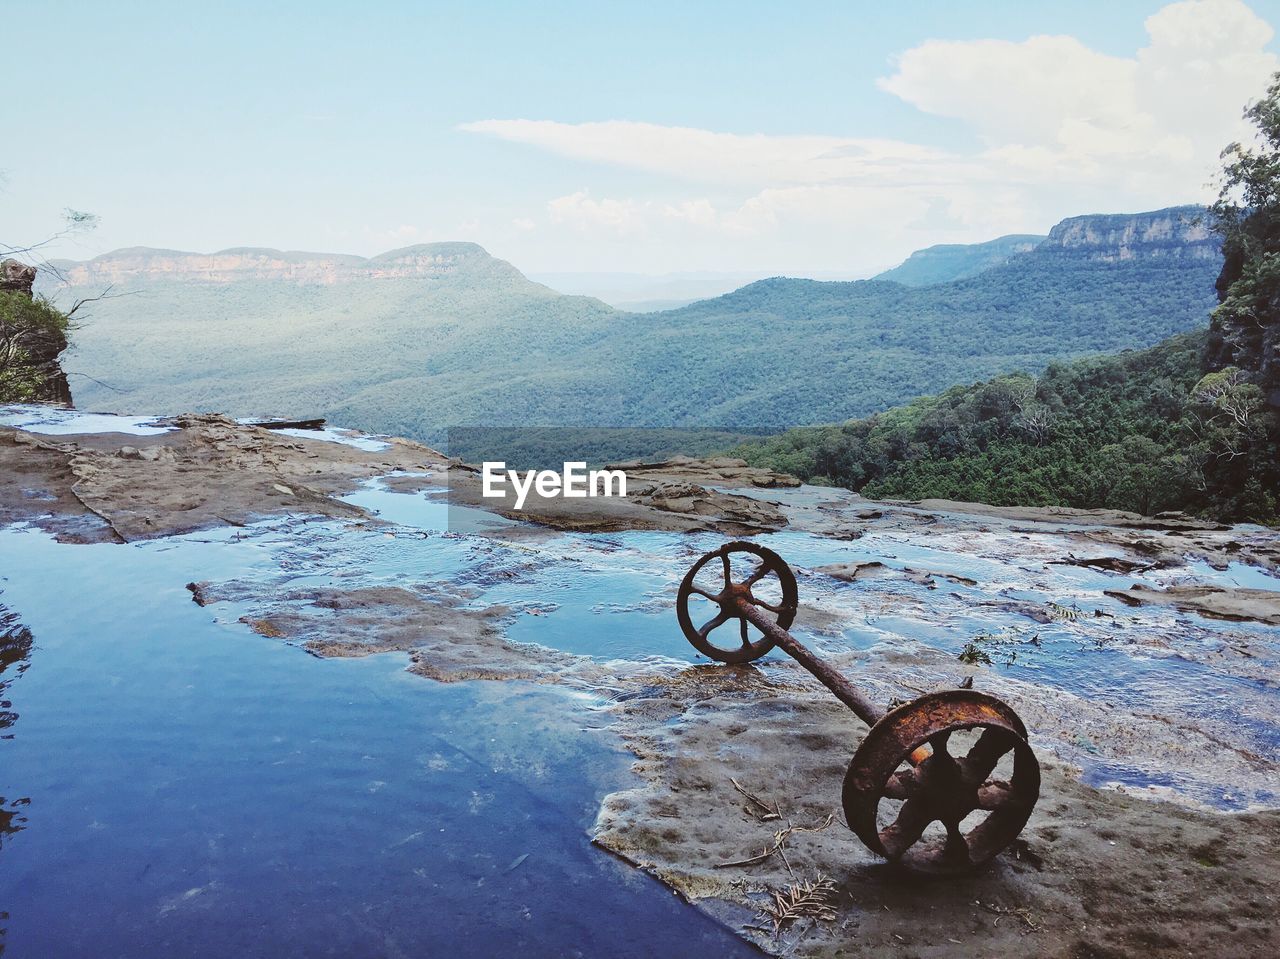 Rusty wheels by mountain range at blue mountains national park